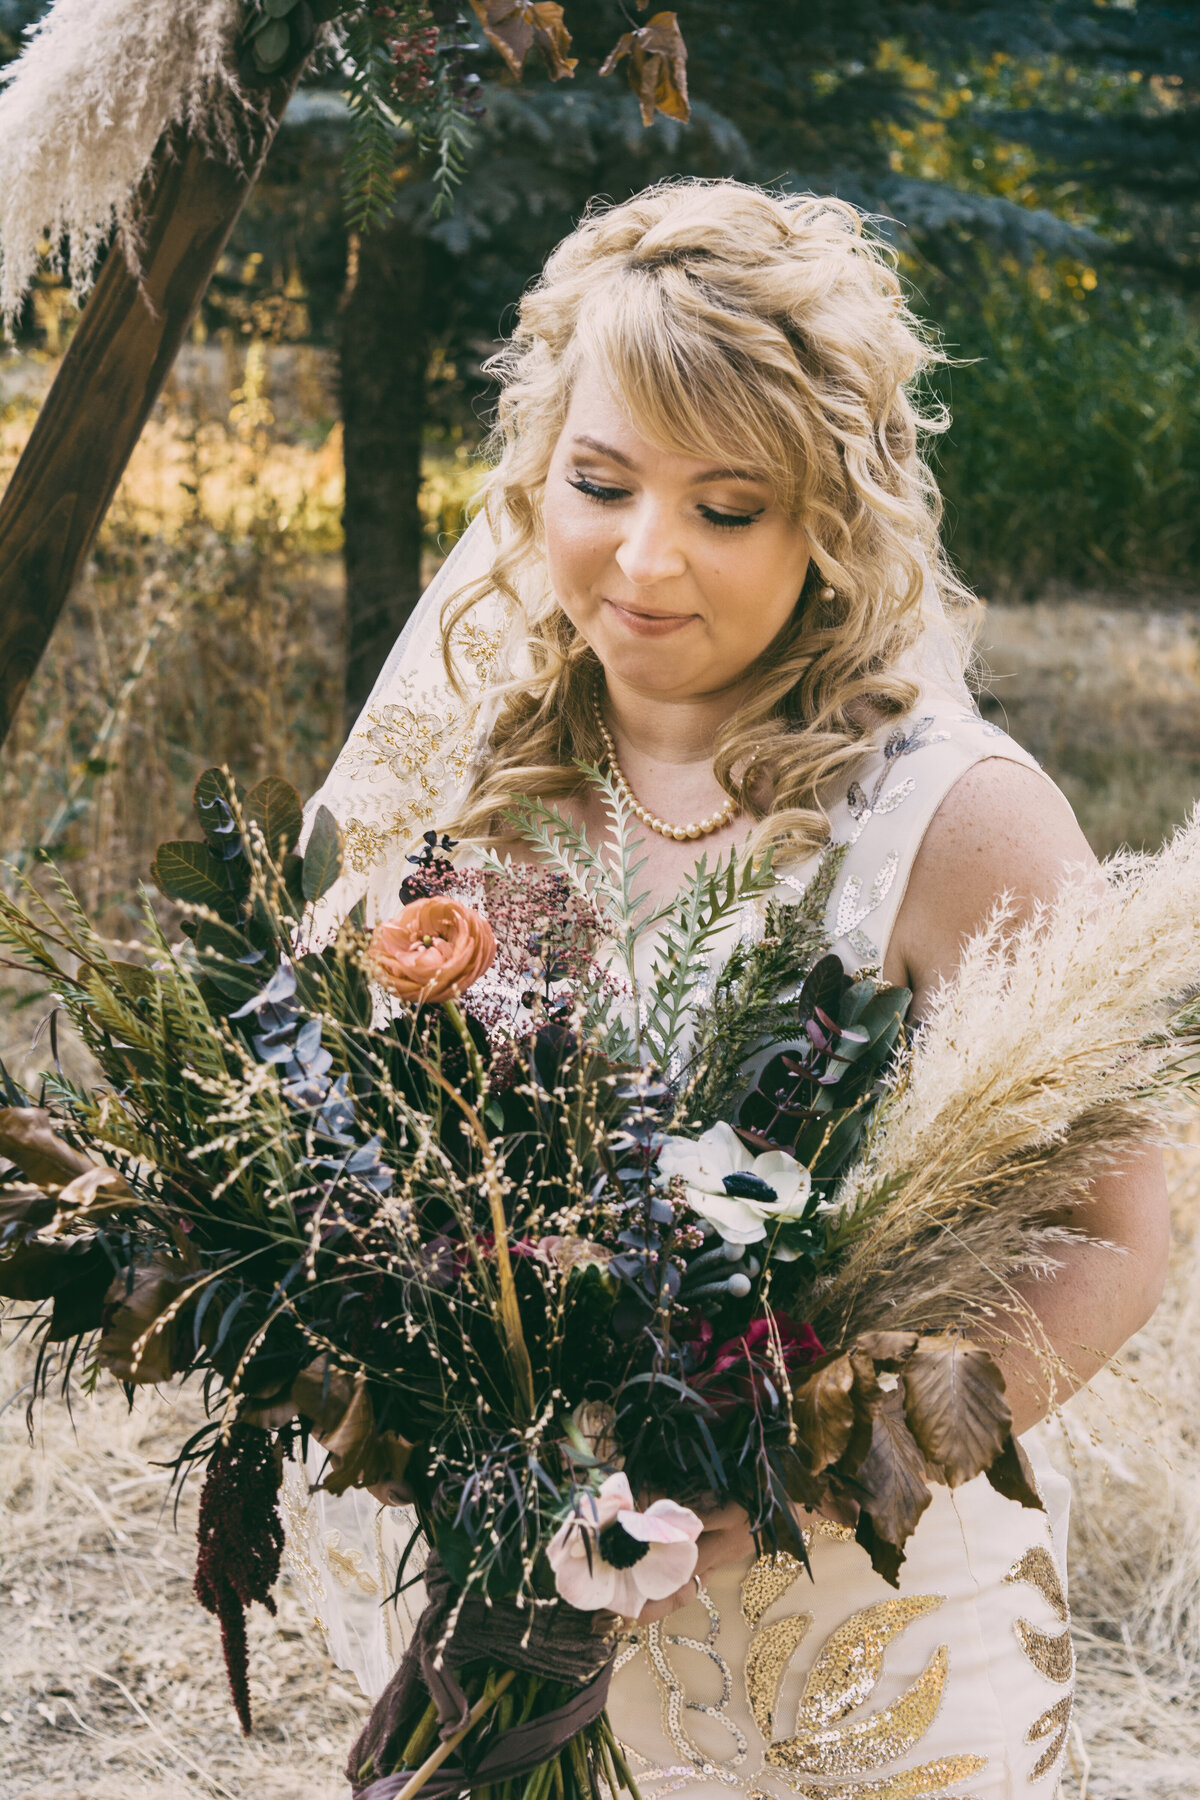 A romantic bride with a rustic bouquet, captured by 4Karma Studio. Bohemian wedding photography style